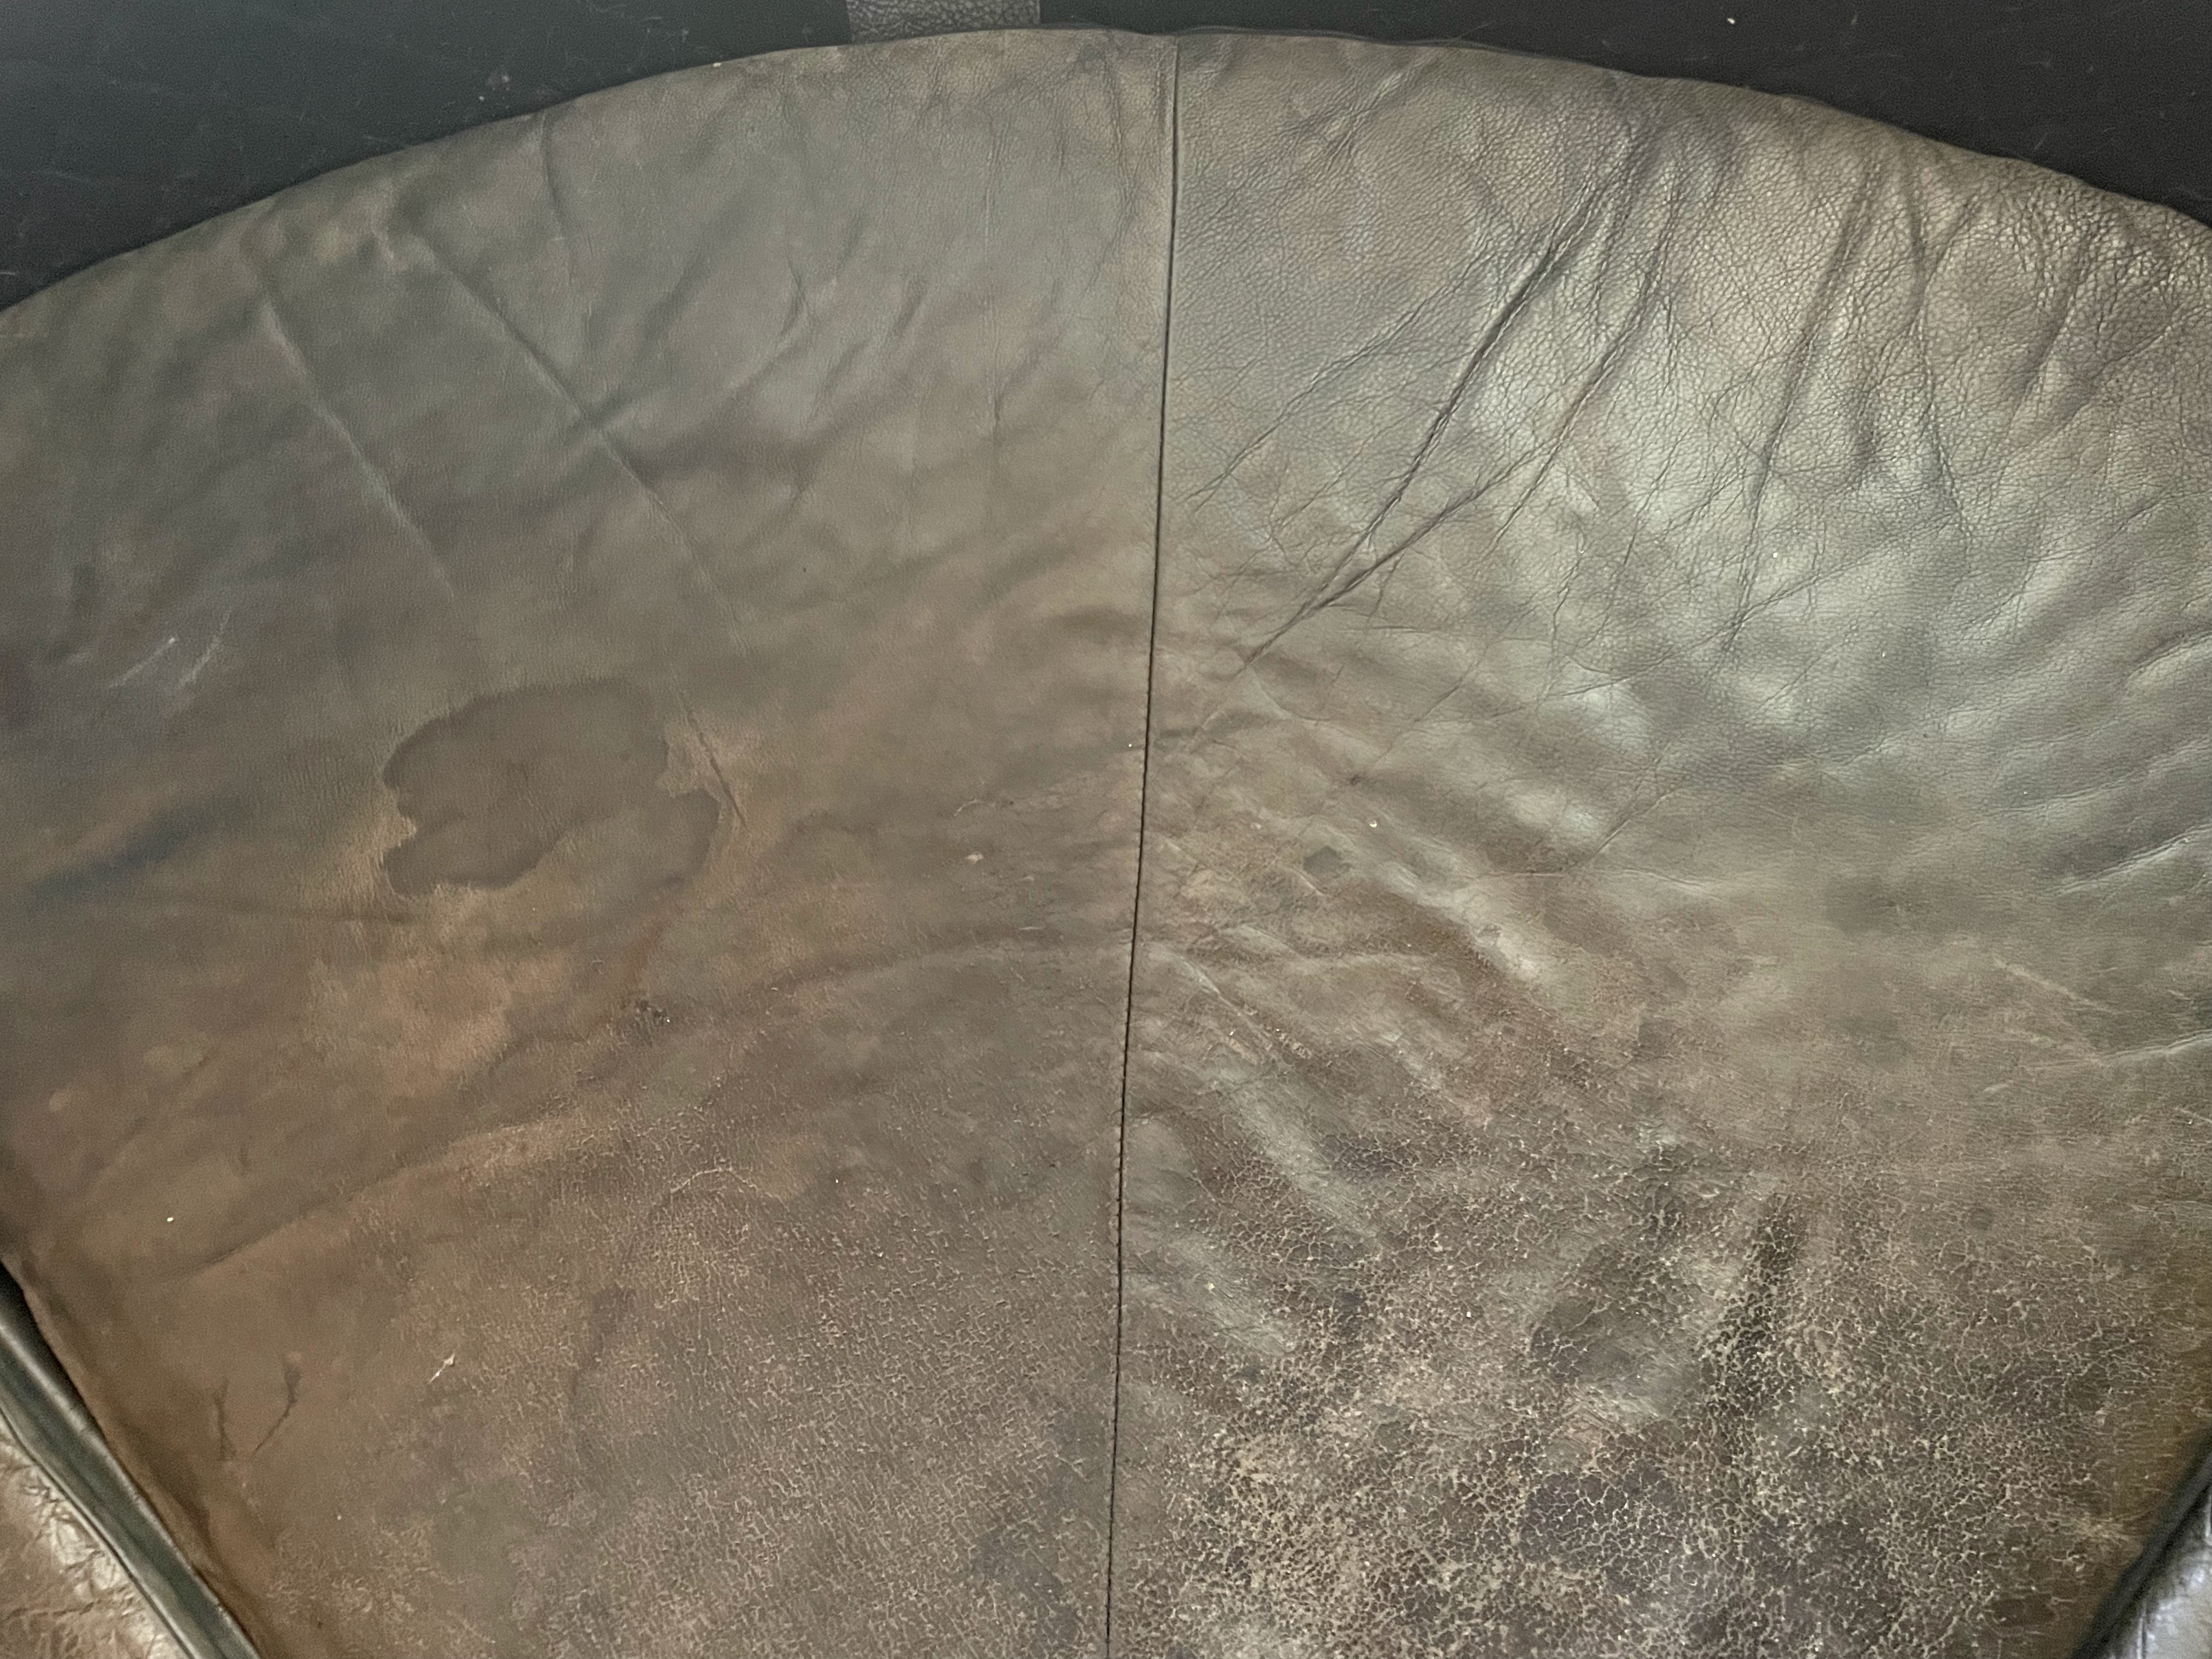 A leather couch with a slightly less noticeable stain after it's been scrubbed.